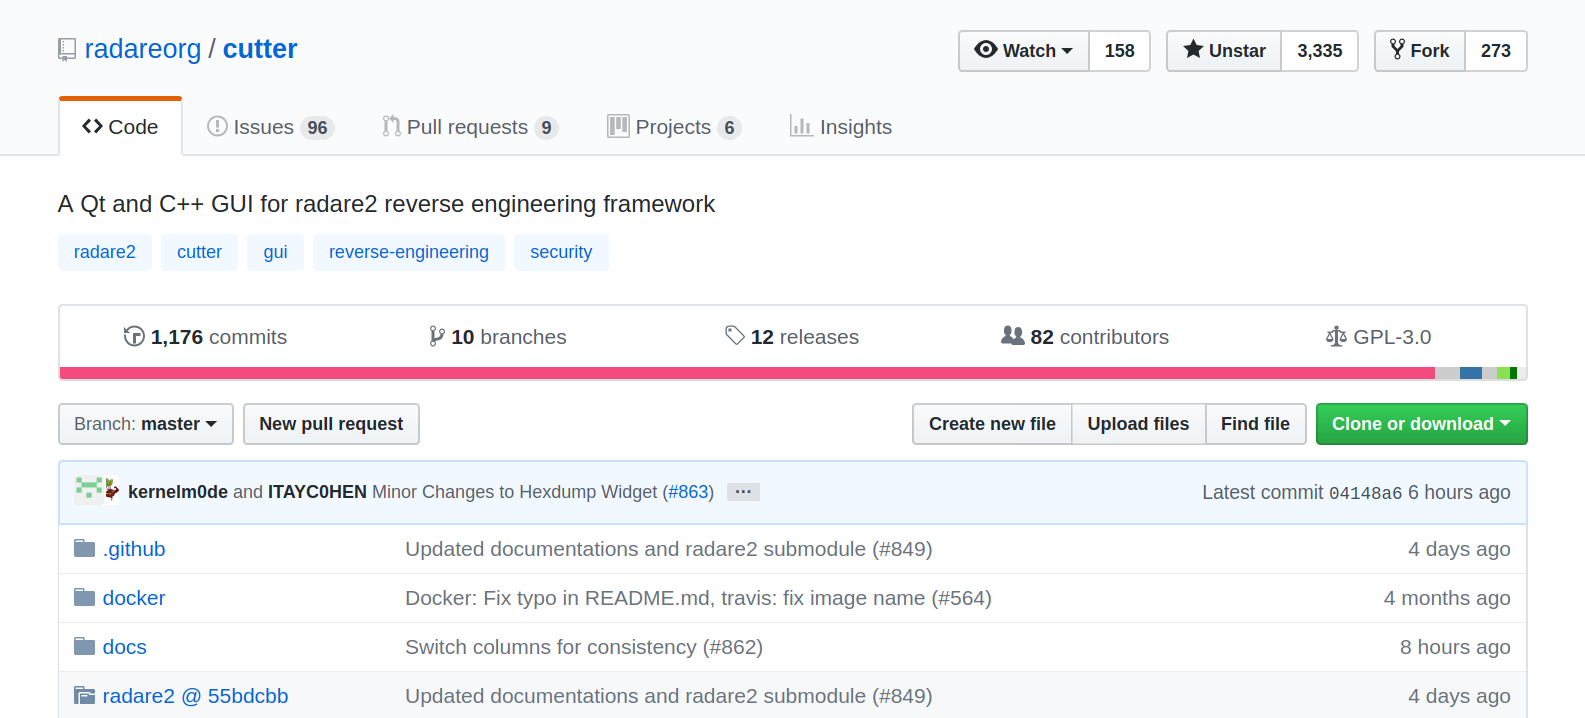 A screenshot of the radare2 Cutter repository on GitHub.